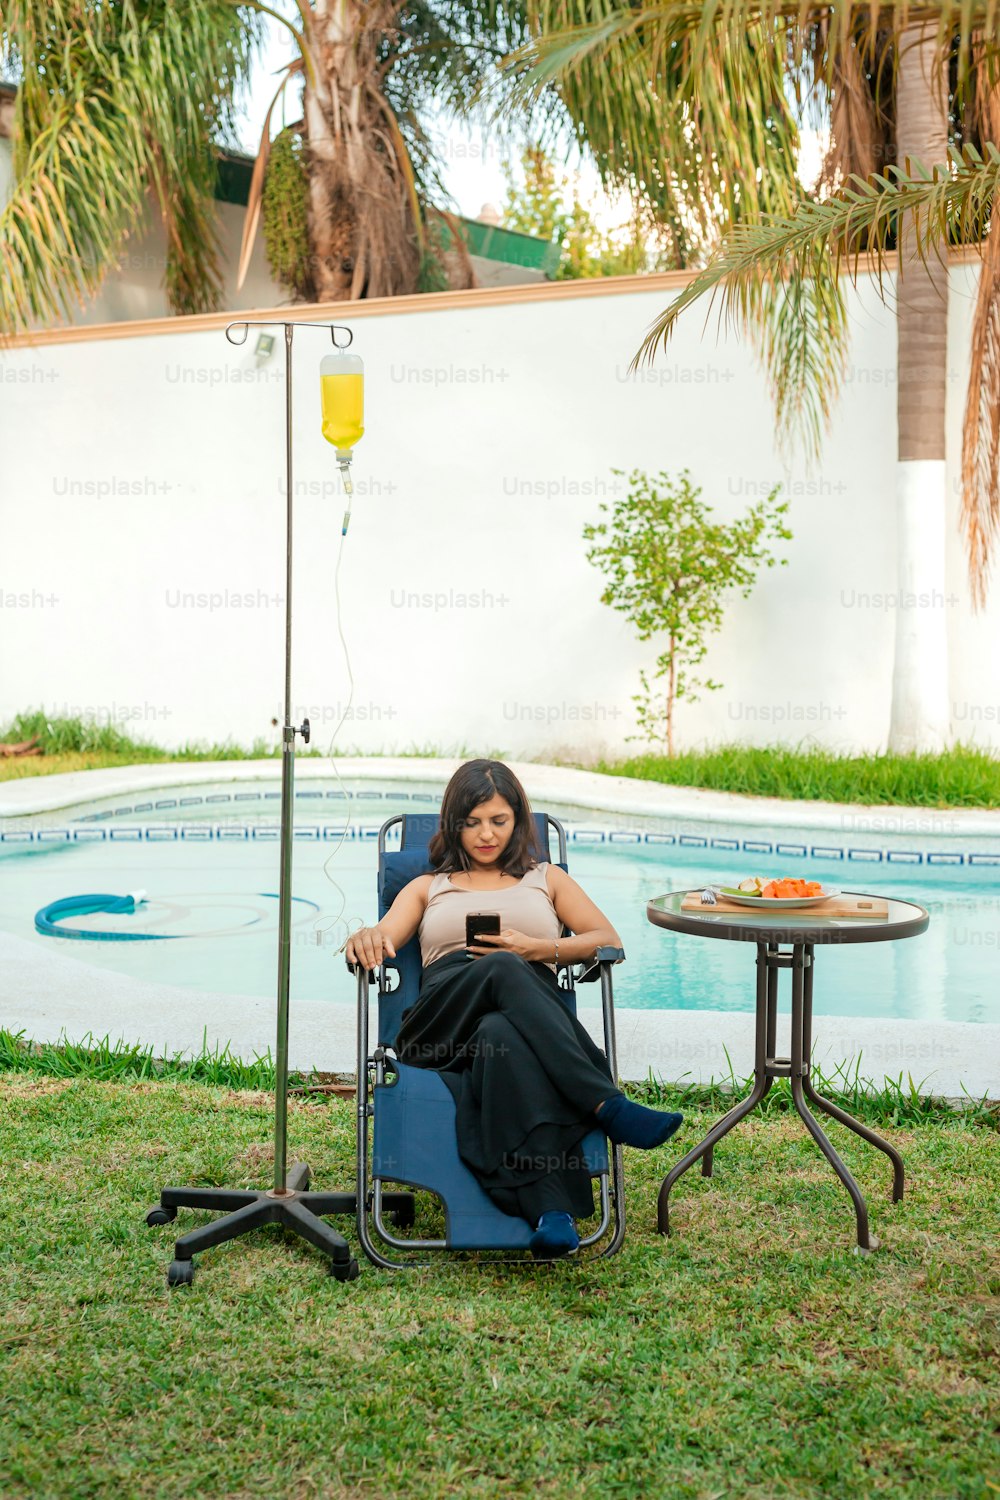 a woman sitting in a chair next to a pool